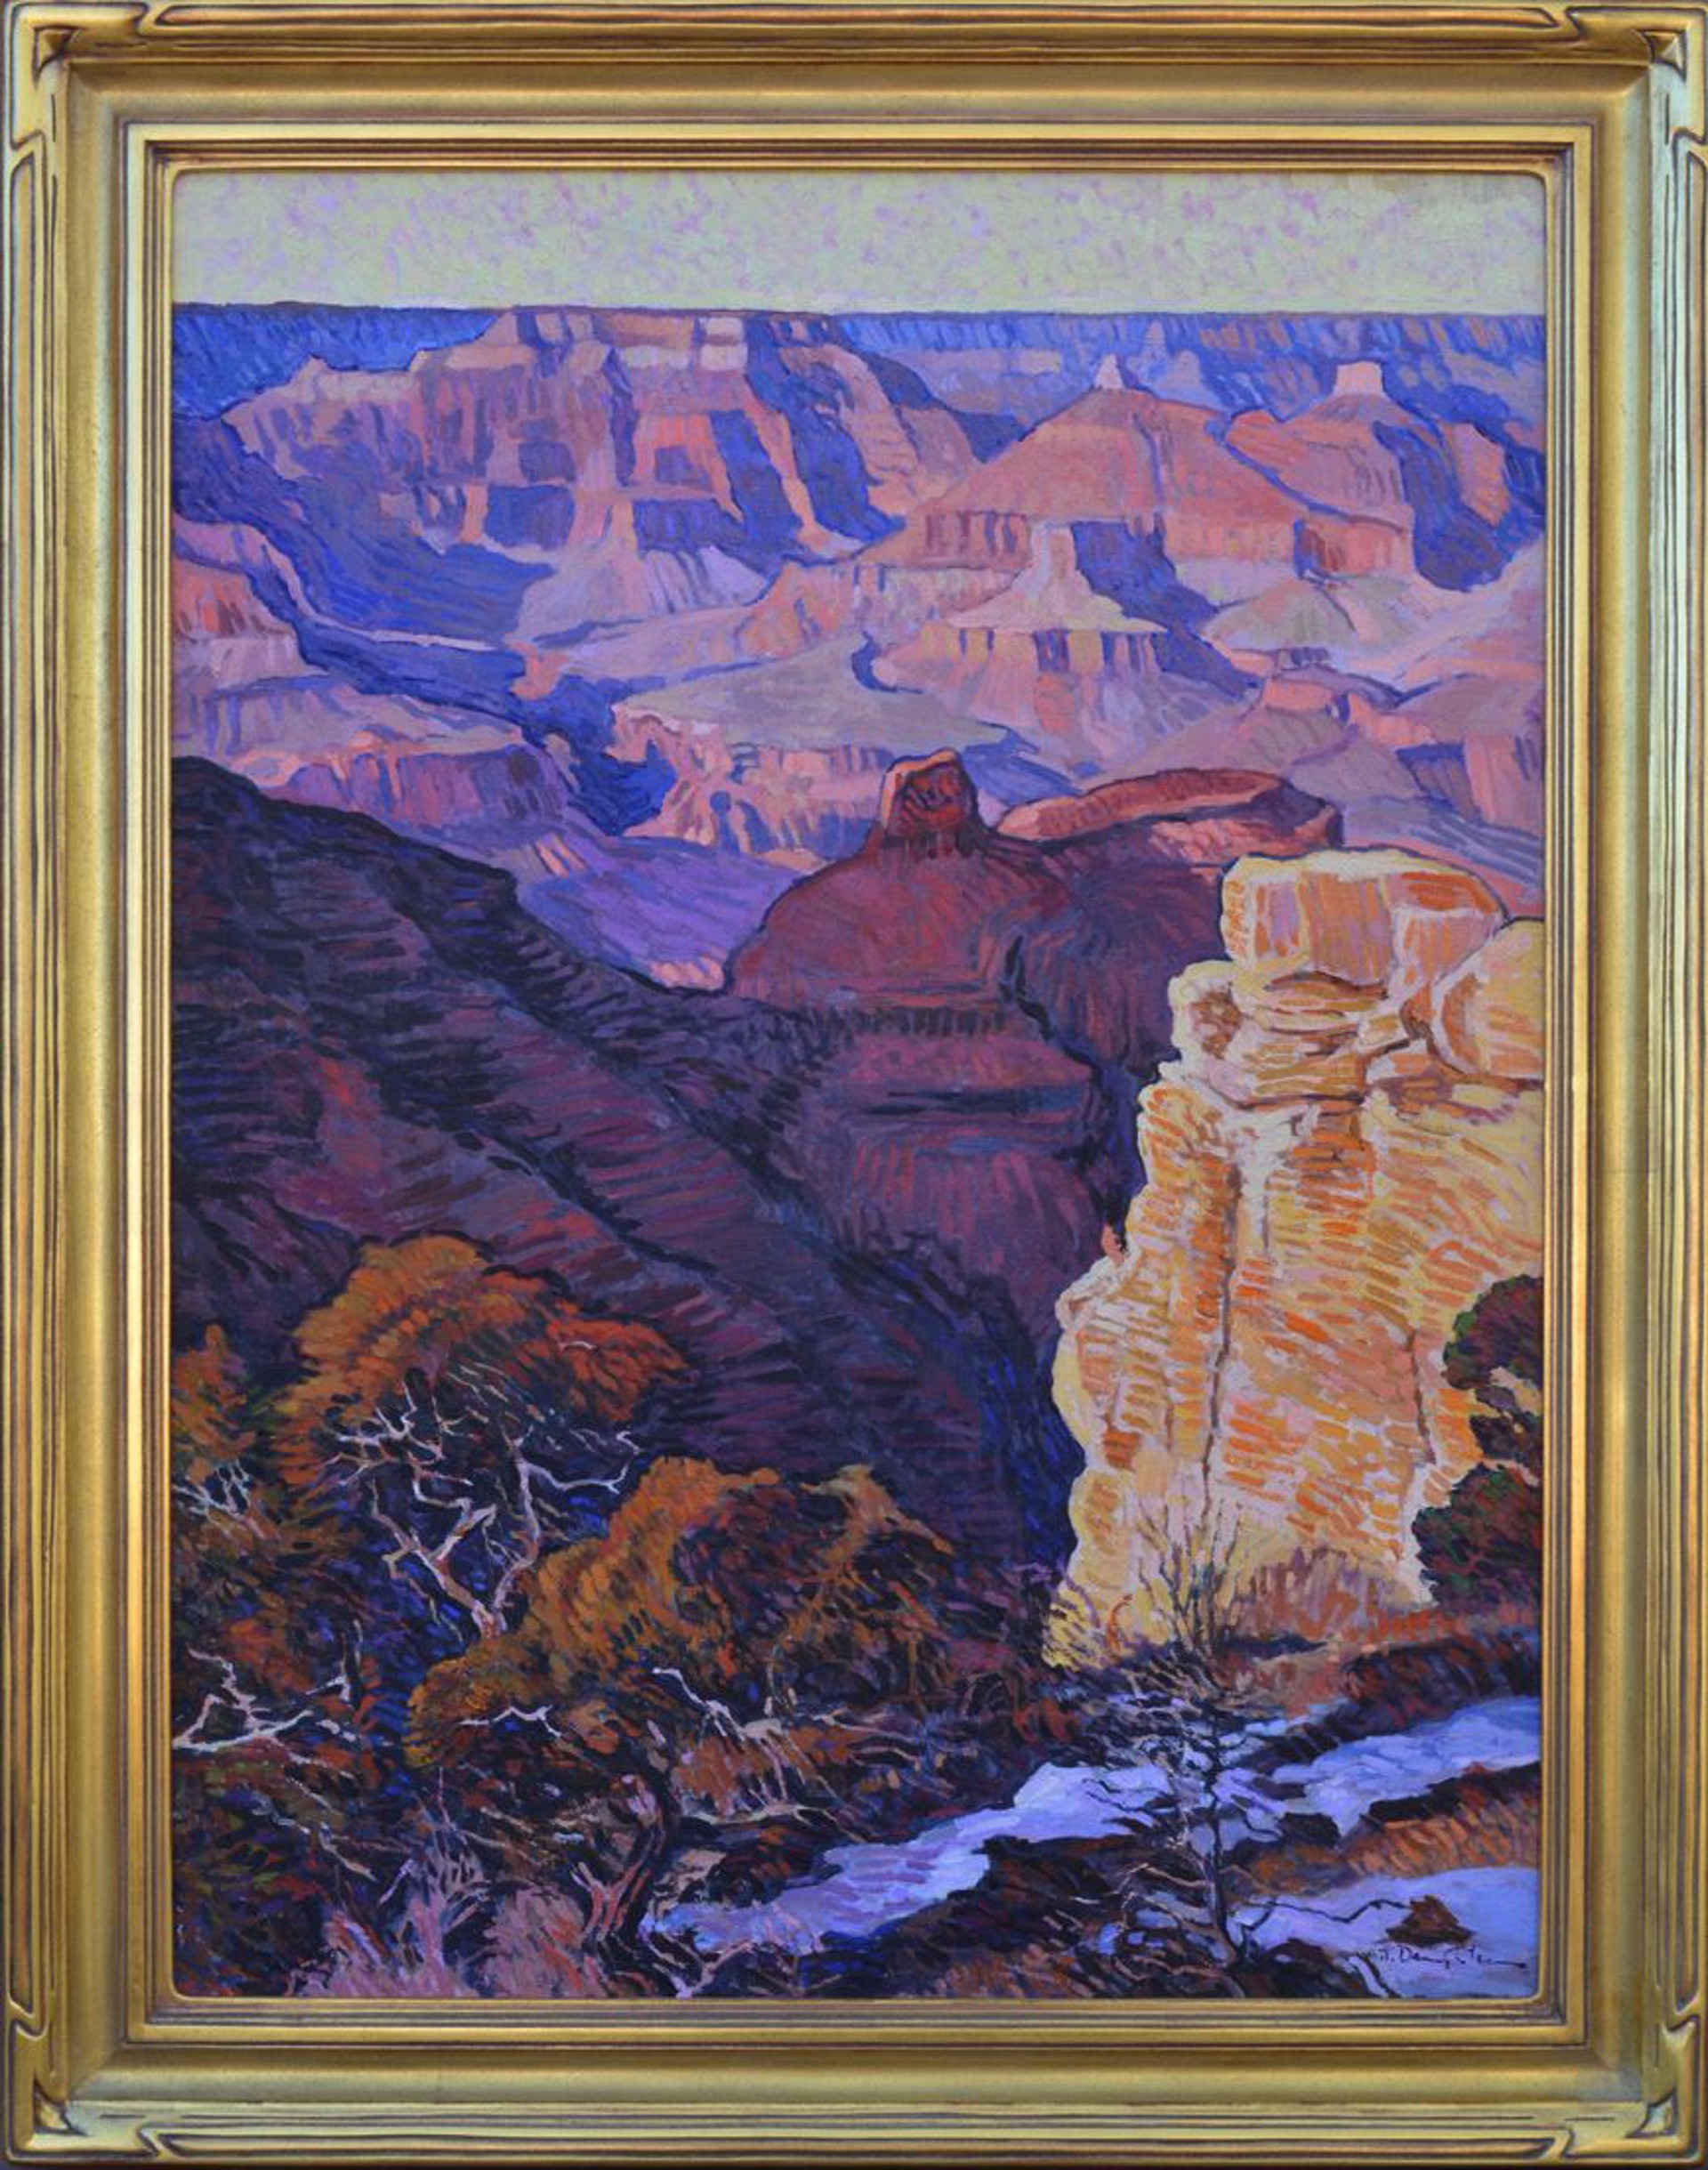 Grand Canyon, South Rim by Robert Daughters (1929-2013)